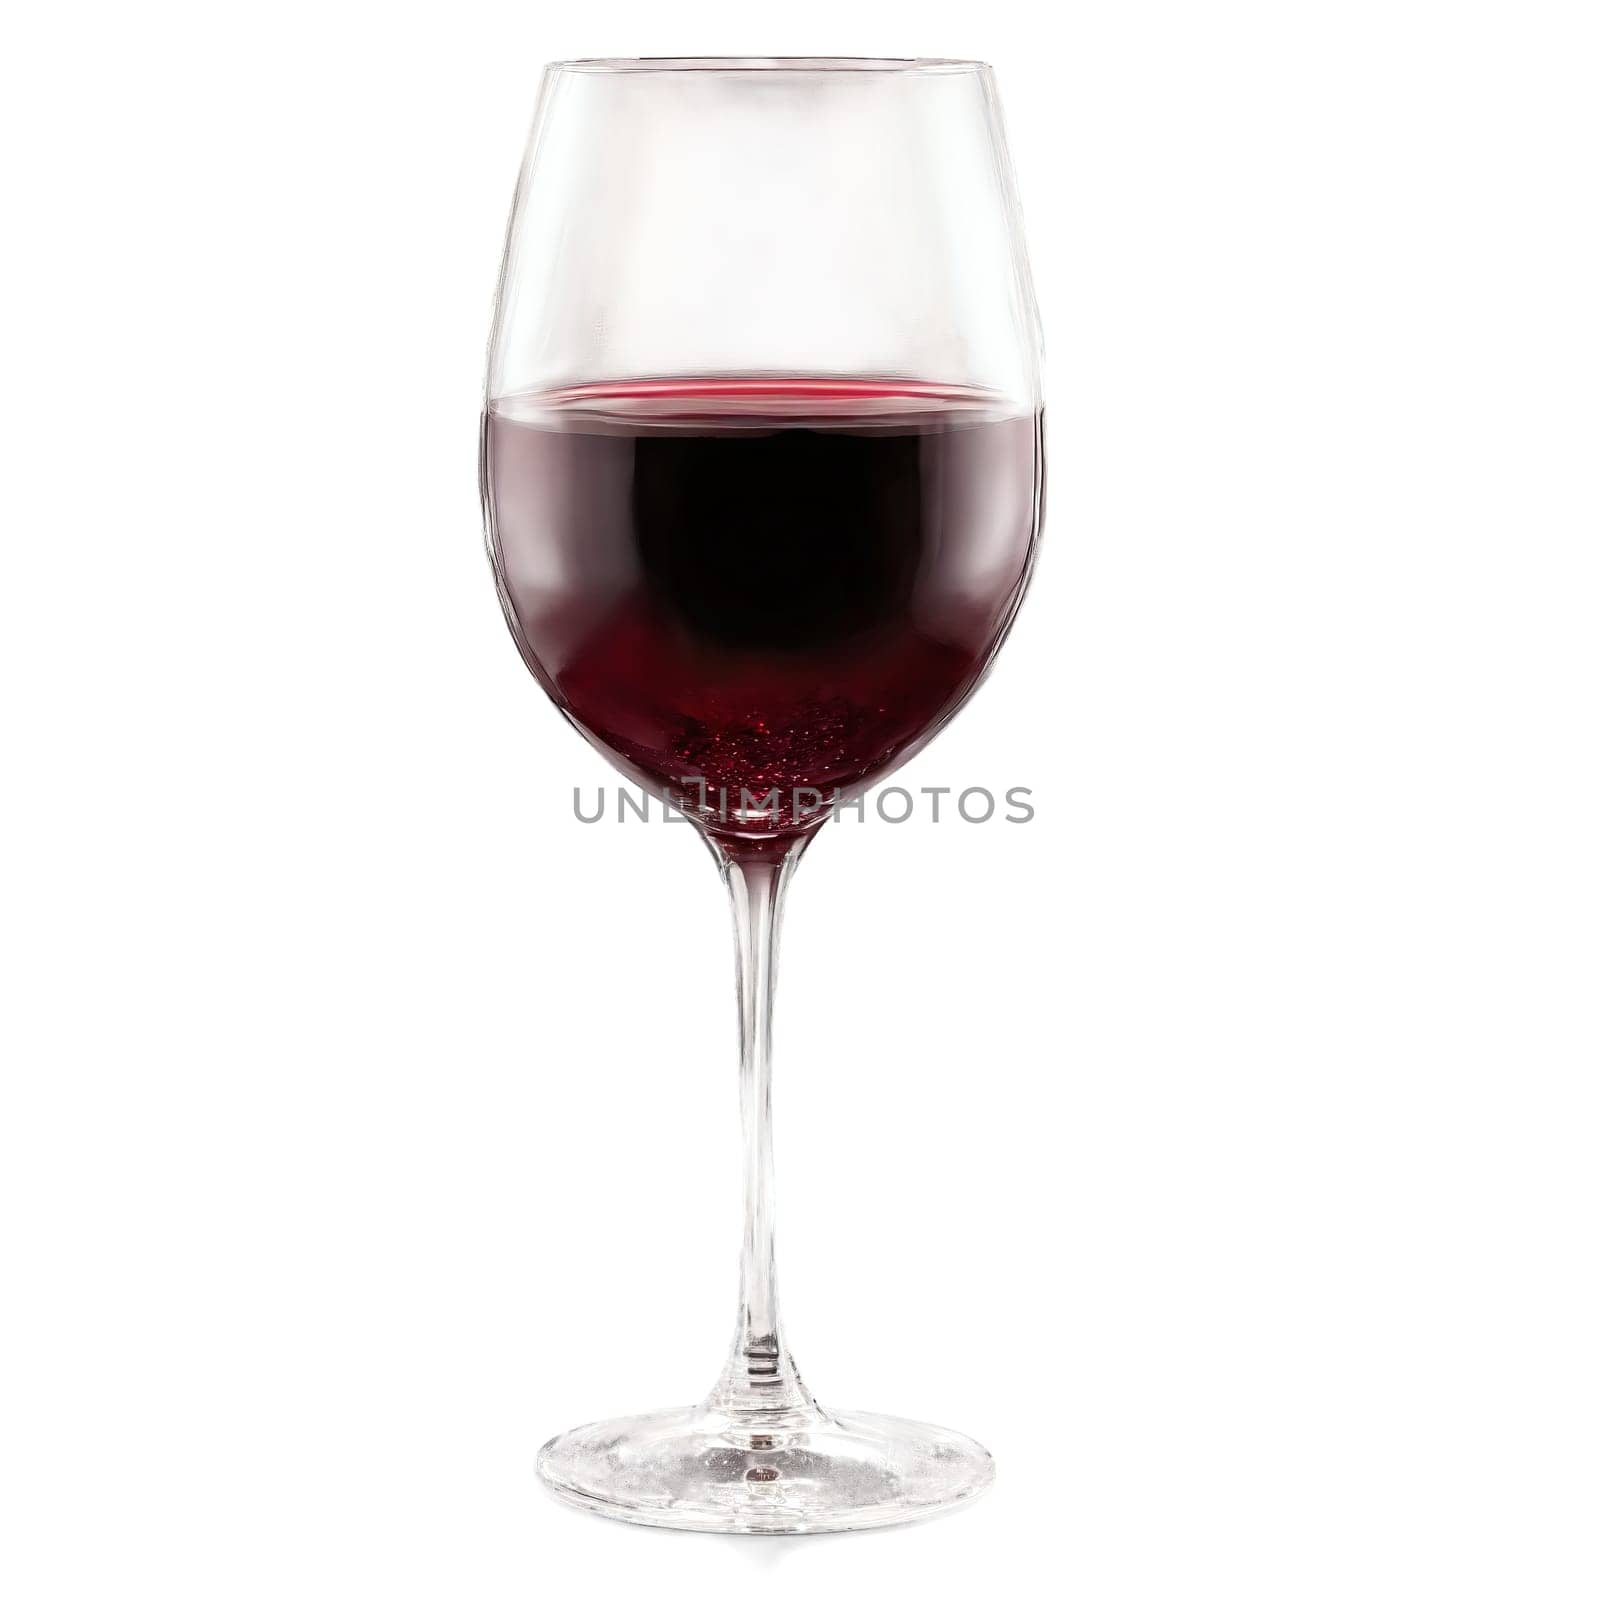 Iconic Merlot wine glass curvaceous crystal goblet garnet red wine catching the light hero shot by panophotograph